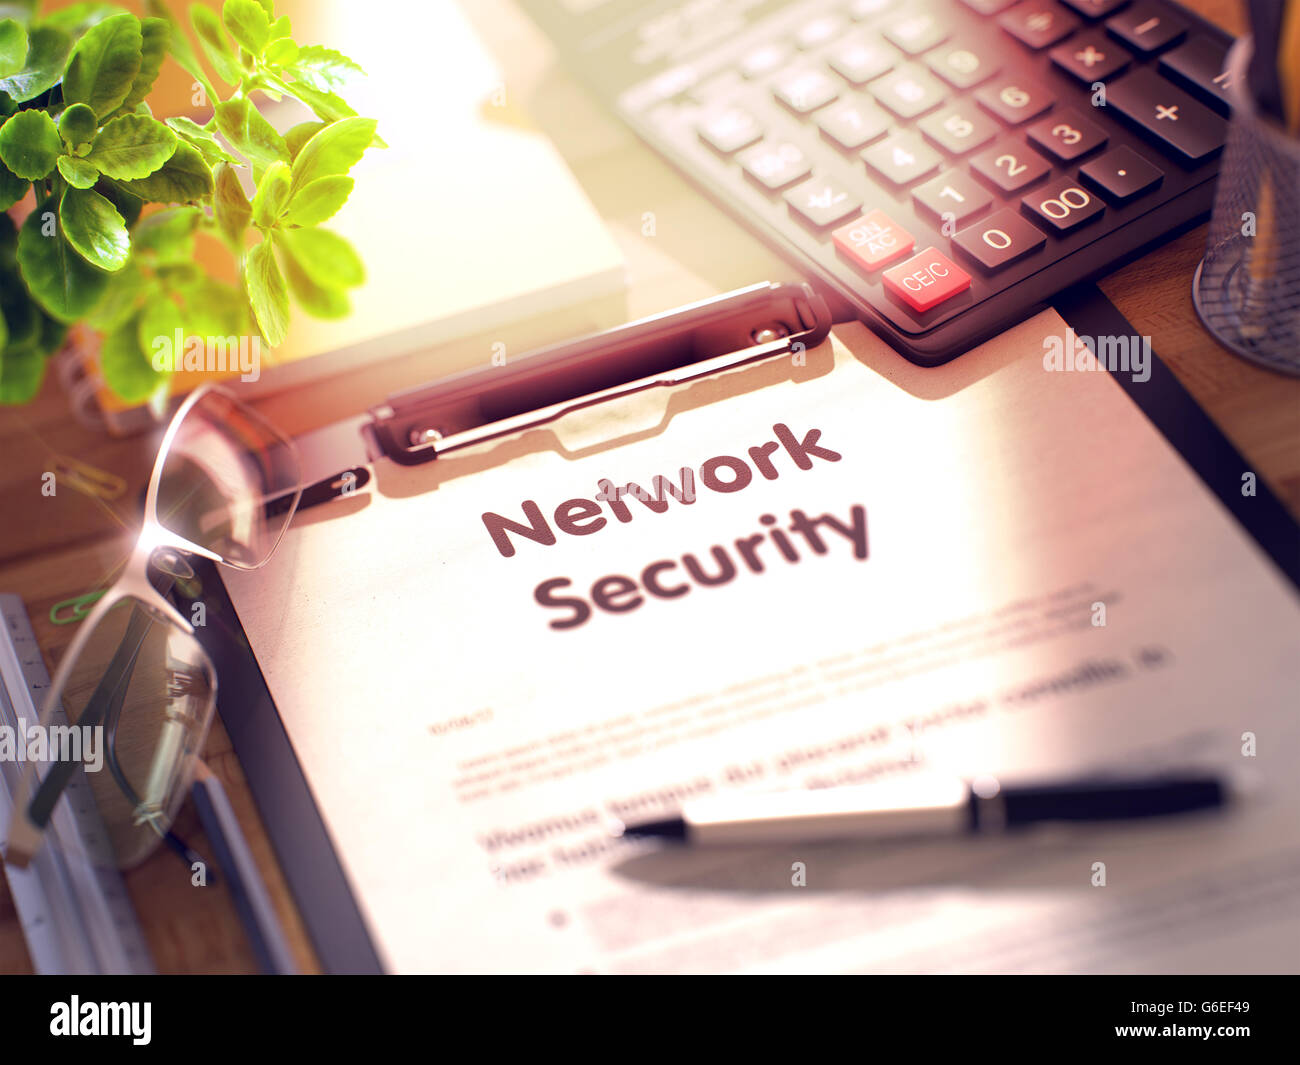 Clipboard with Network Security Concept. Stock Photo